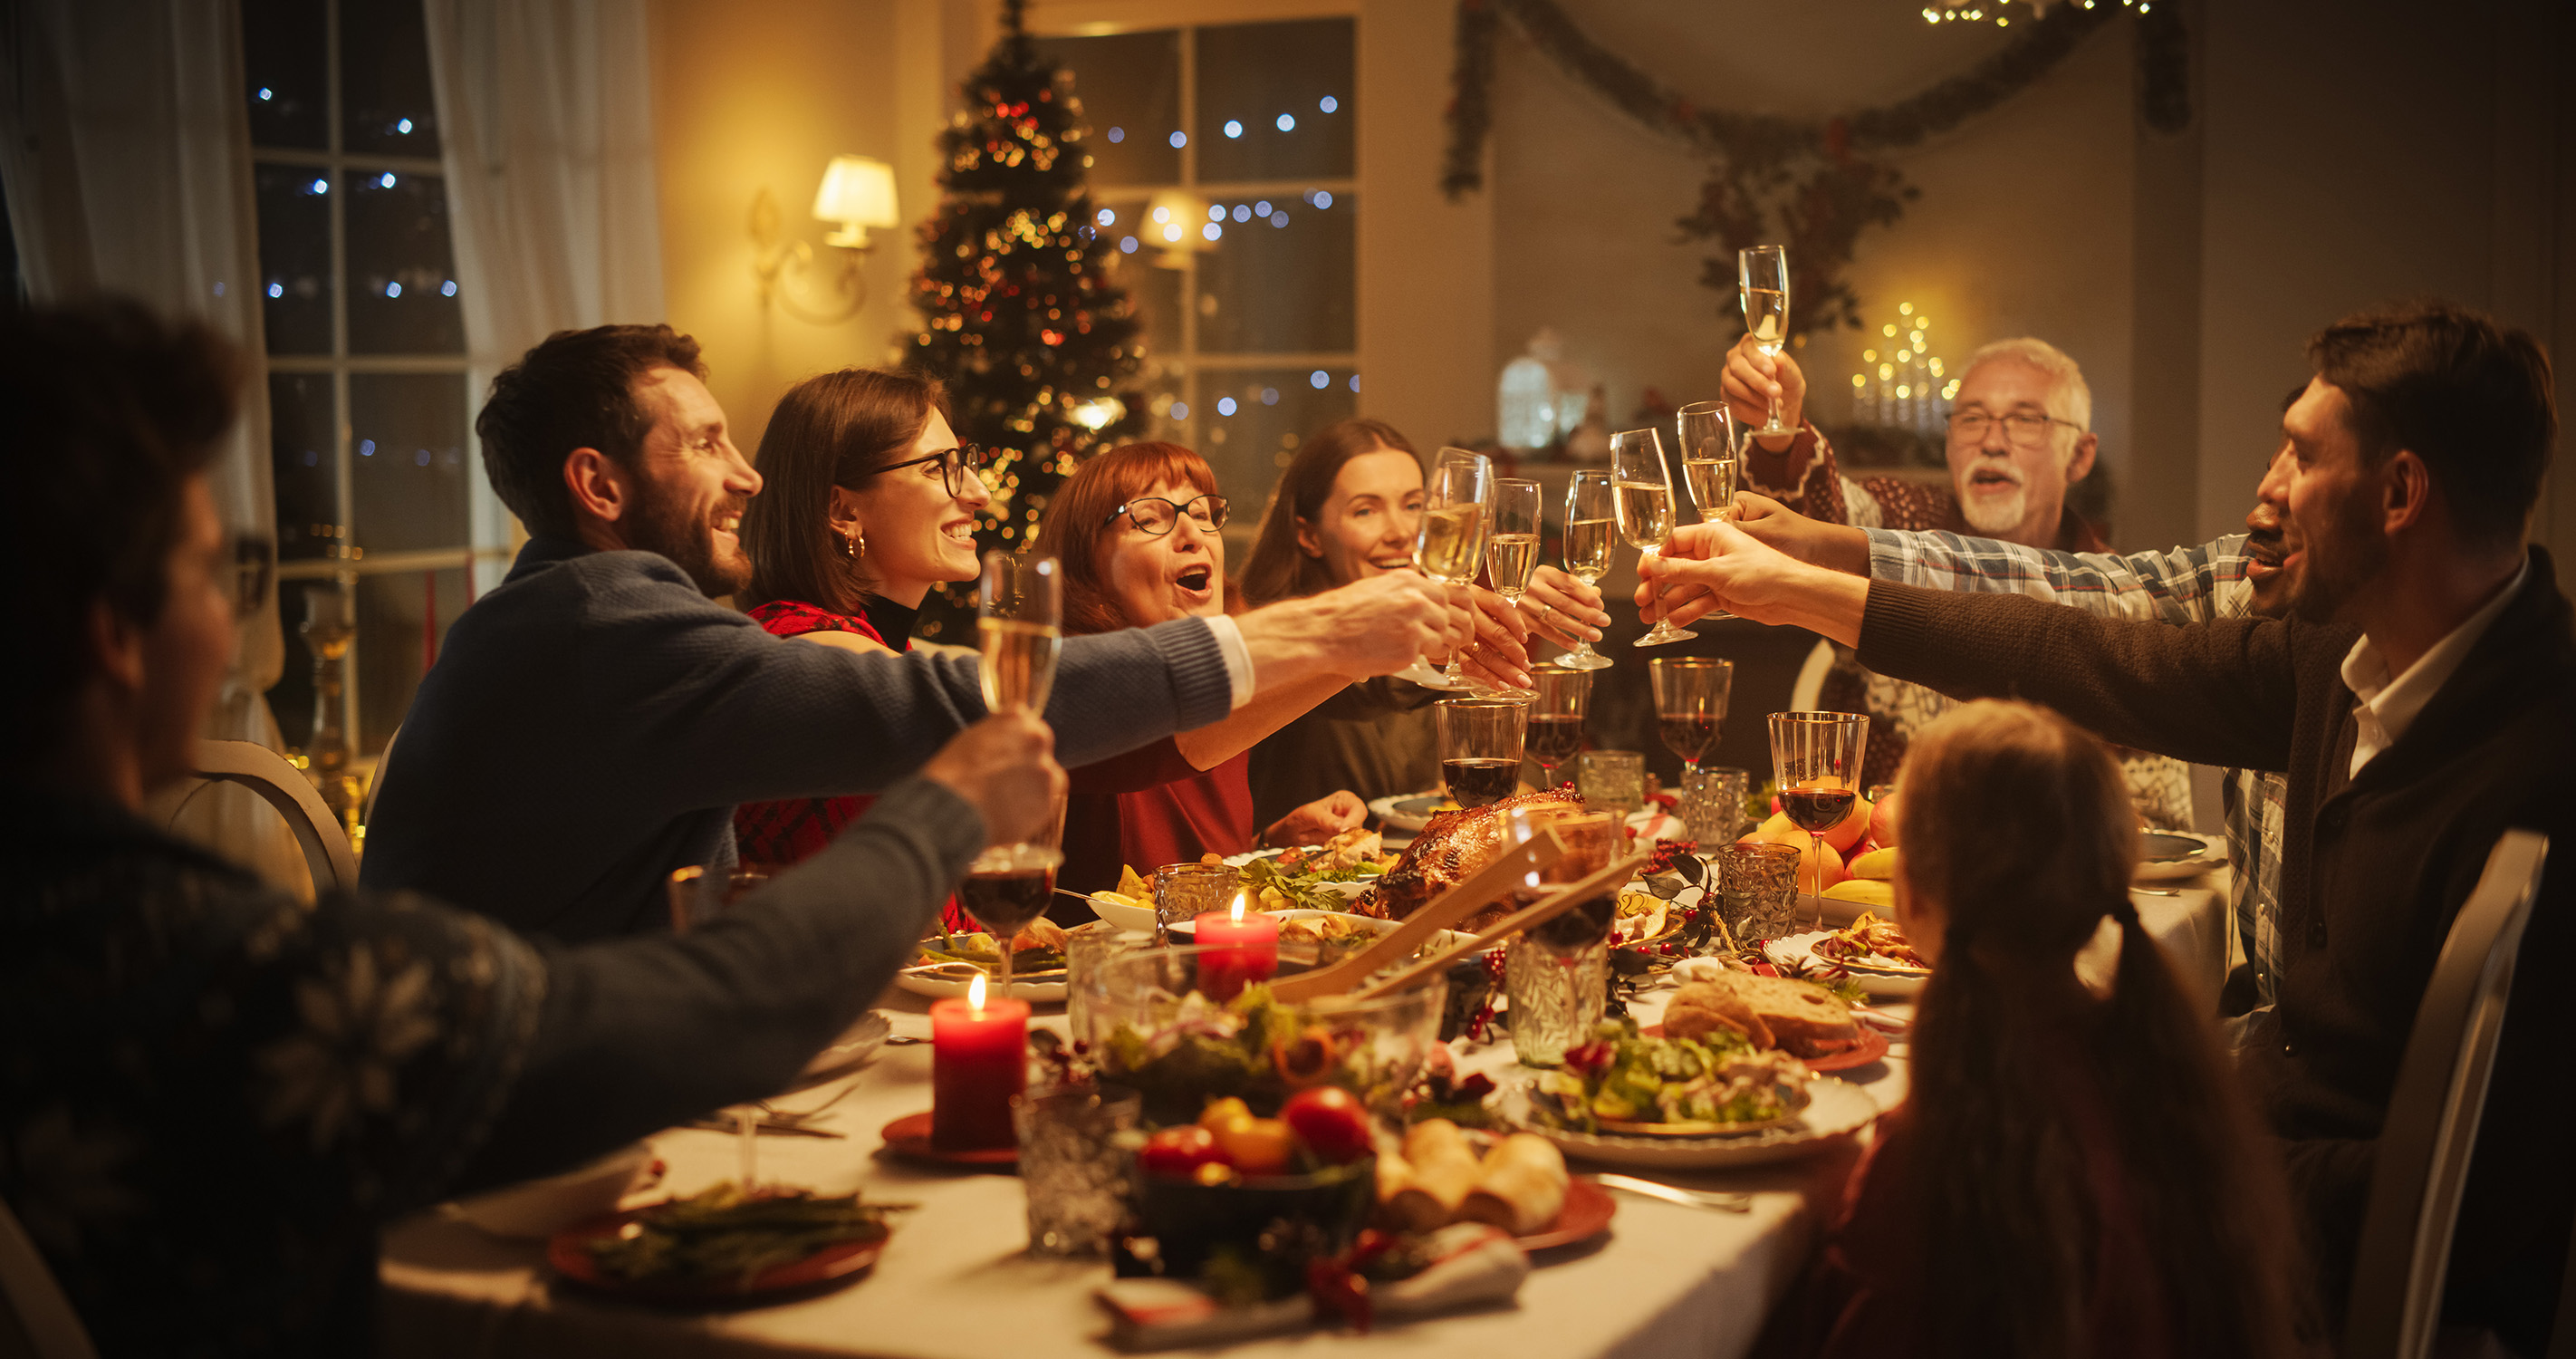 A mixed group of people seated around a rectangular table in preparation to enjoy the holiday meal set before them clink raised wine glasses in a celebratory toast in a room decked with holiday decor